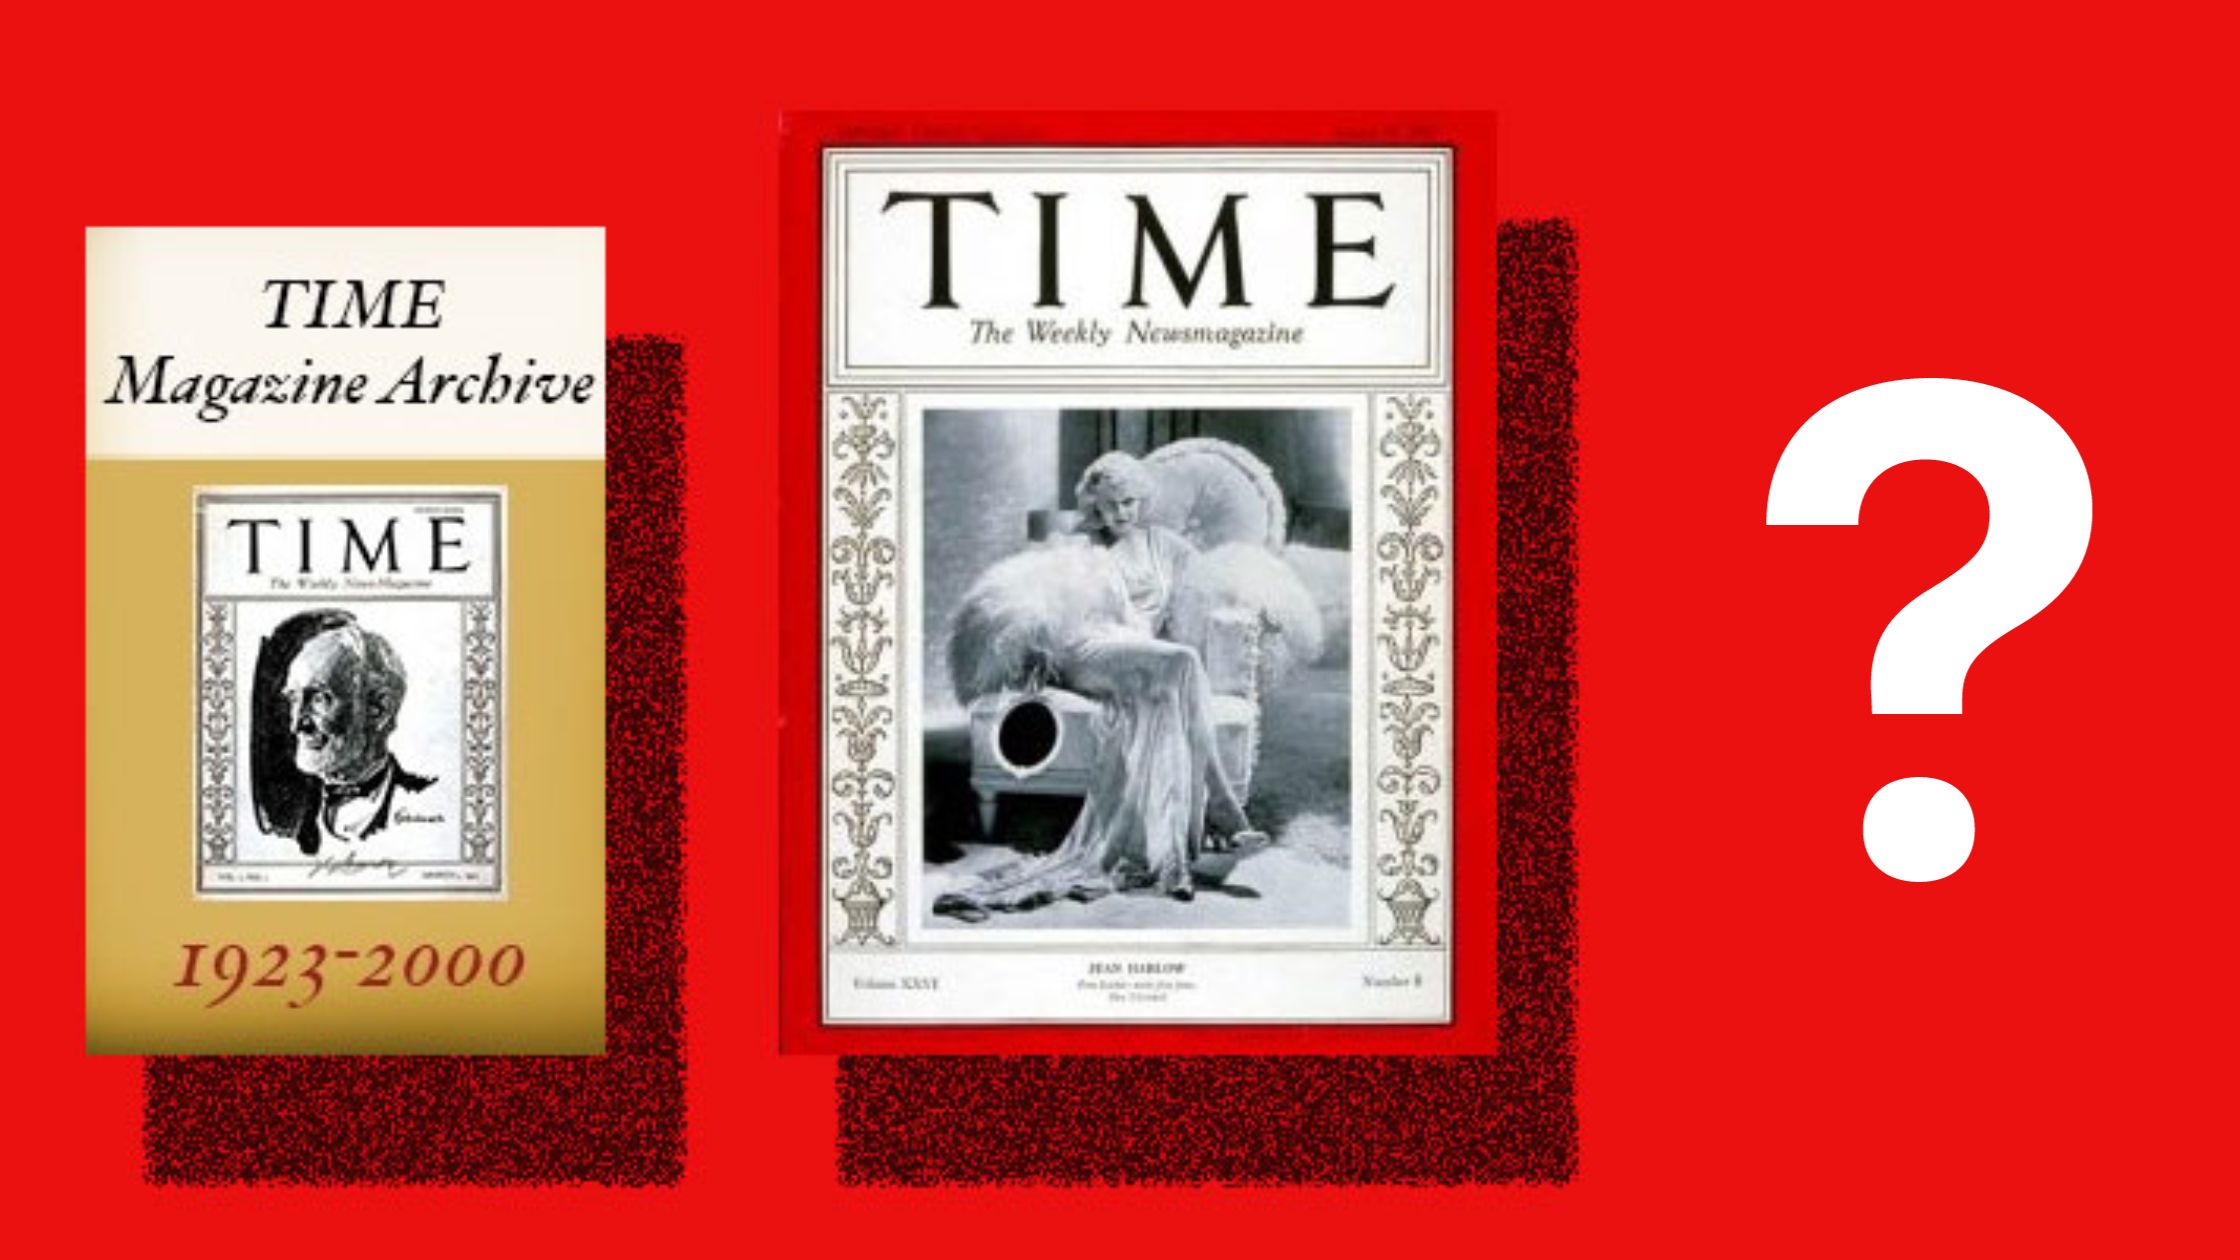 Who was time magazine's man of the year in 1938